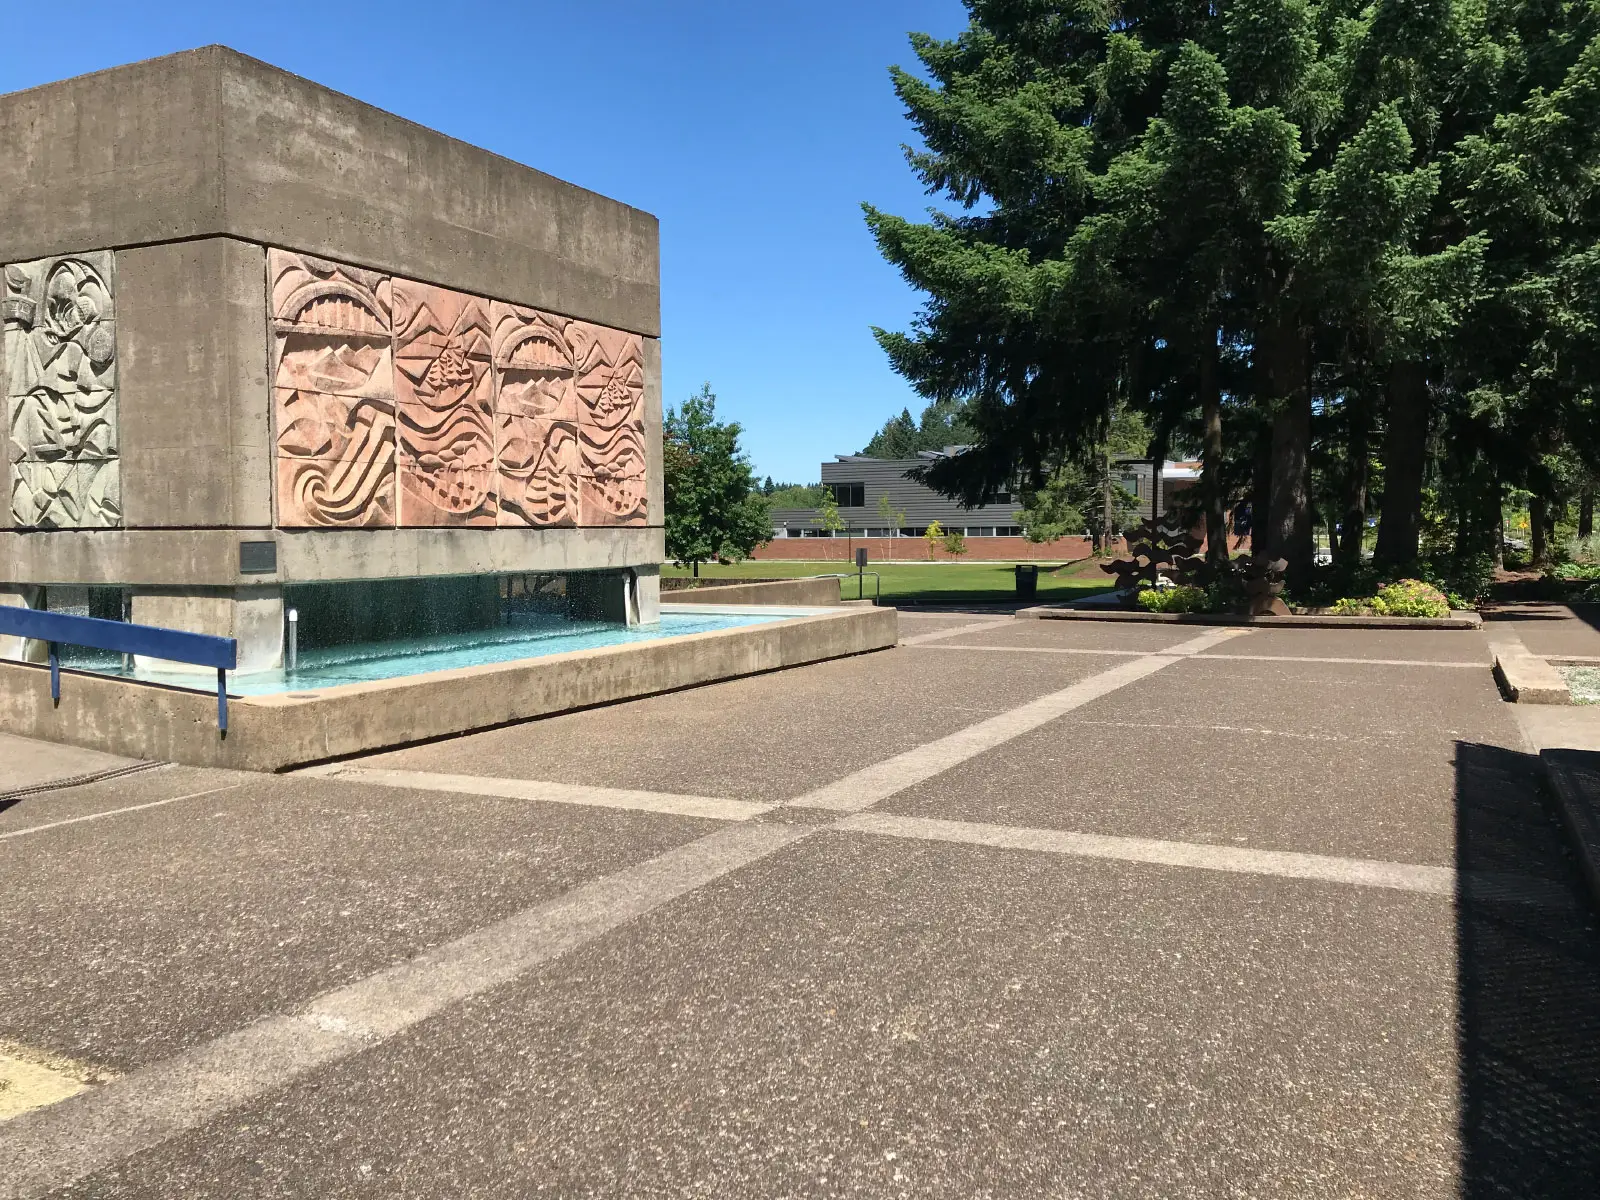 The stone structure and fountain in the quad next to Barlow Hall on the Oregon City campus